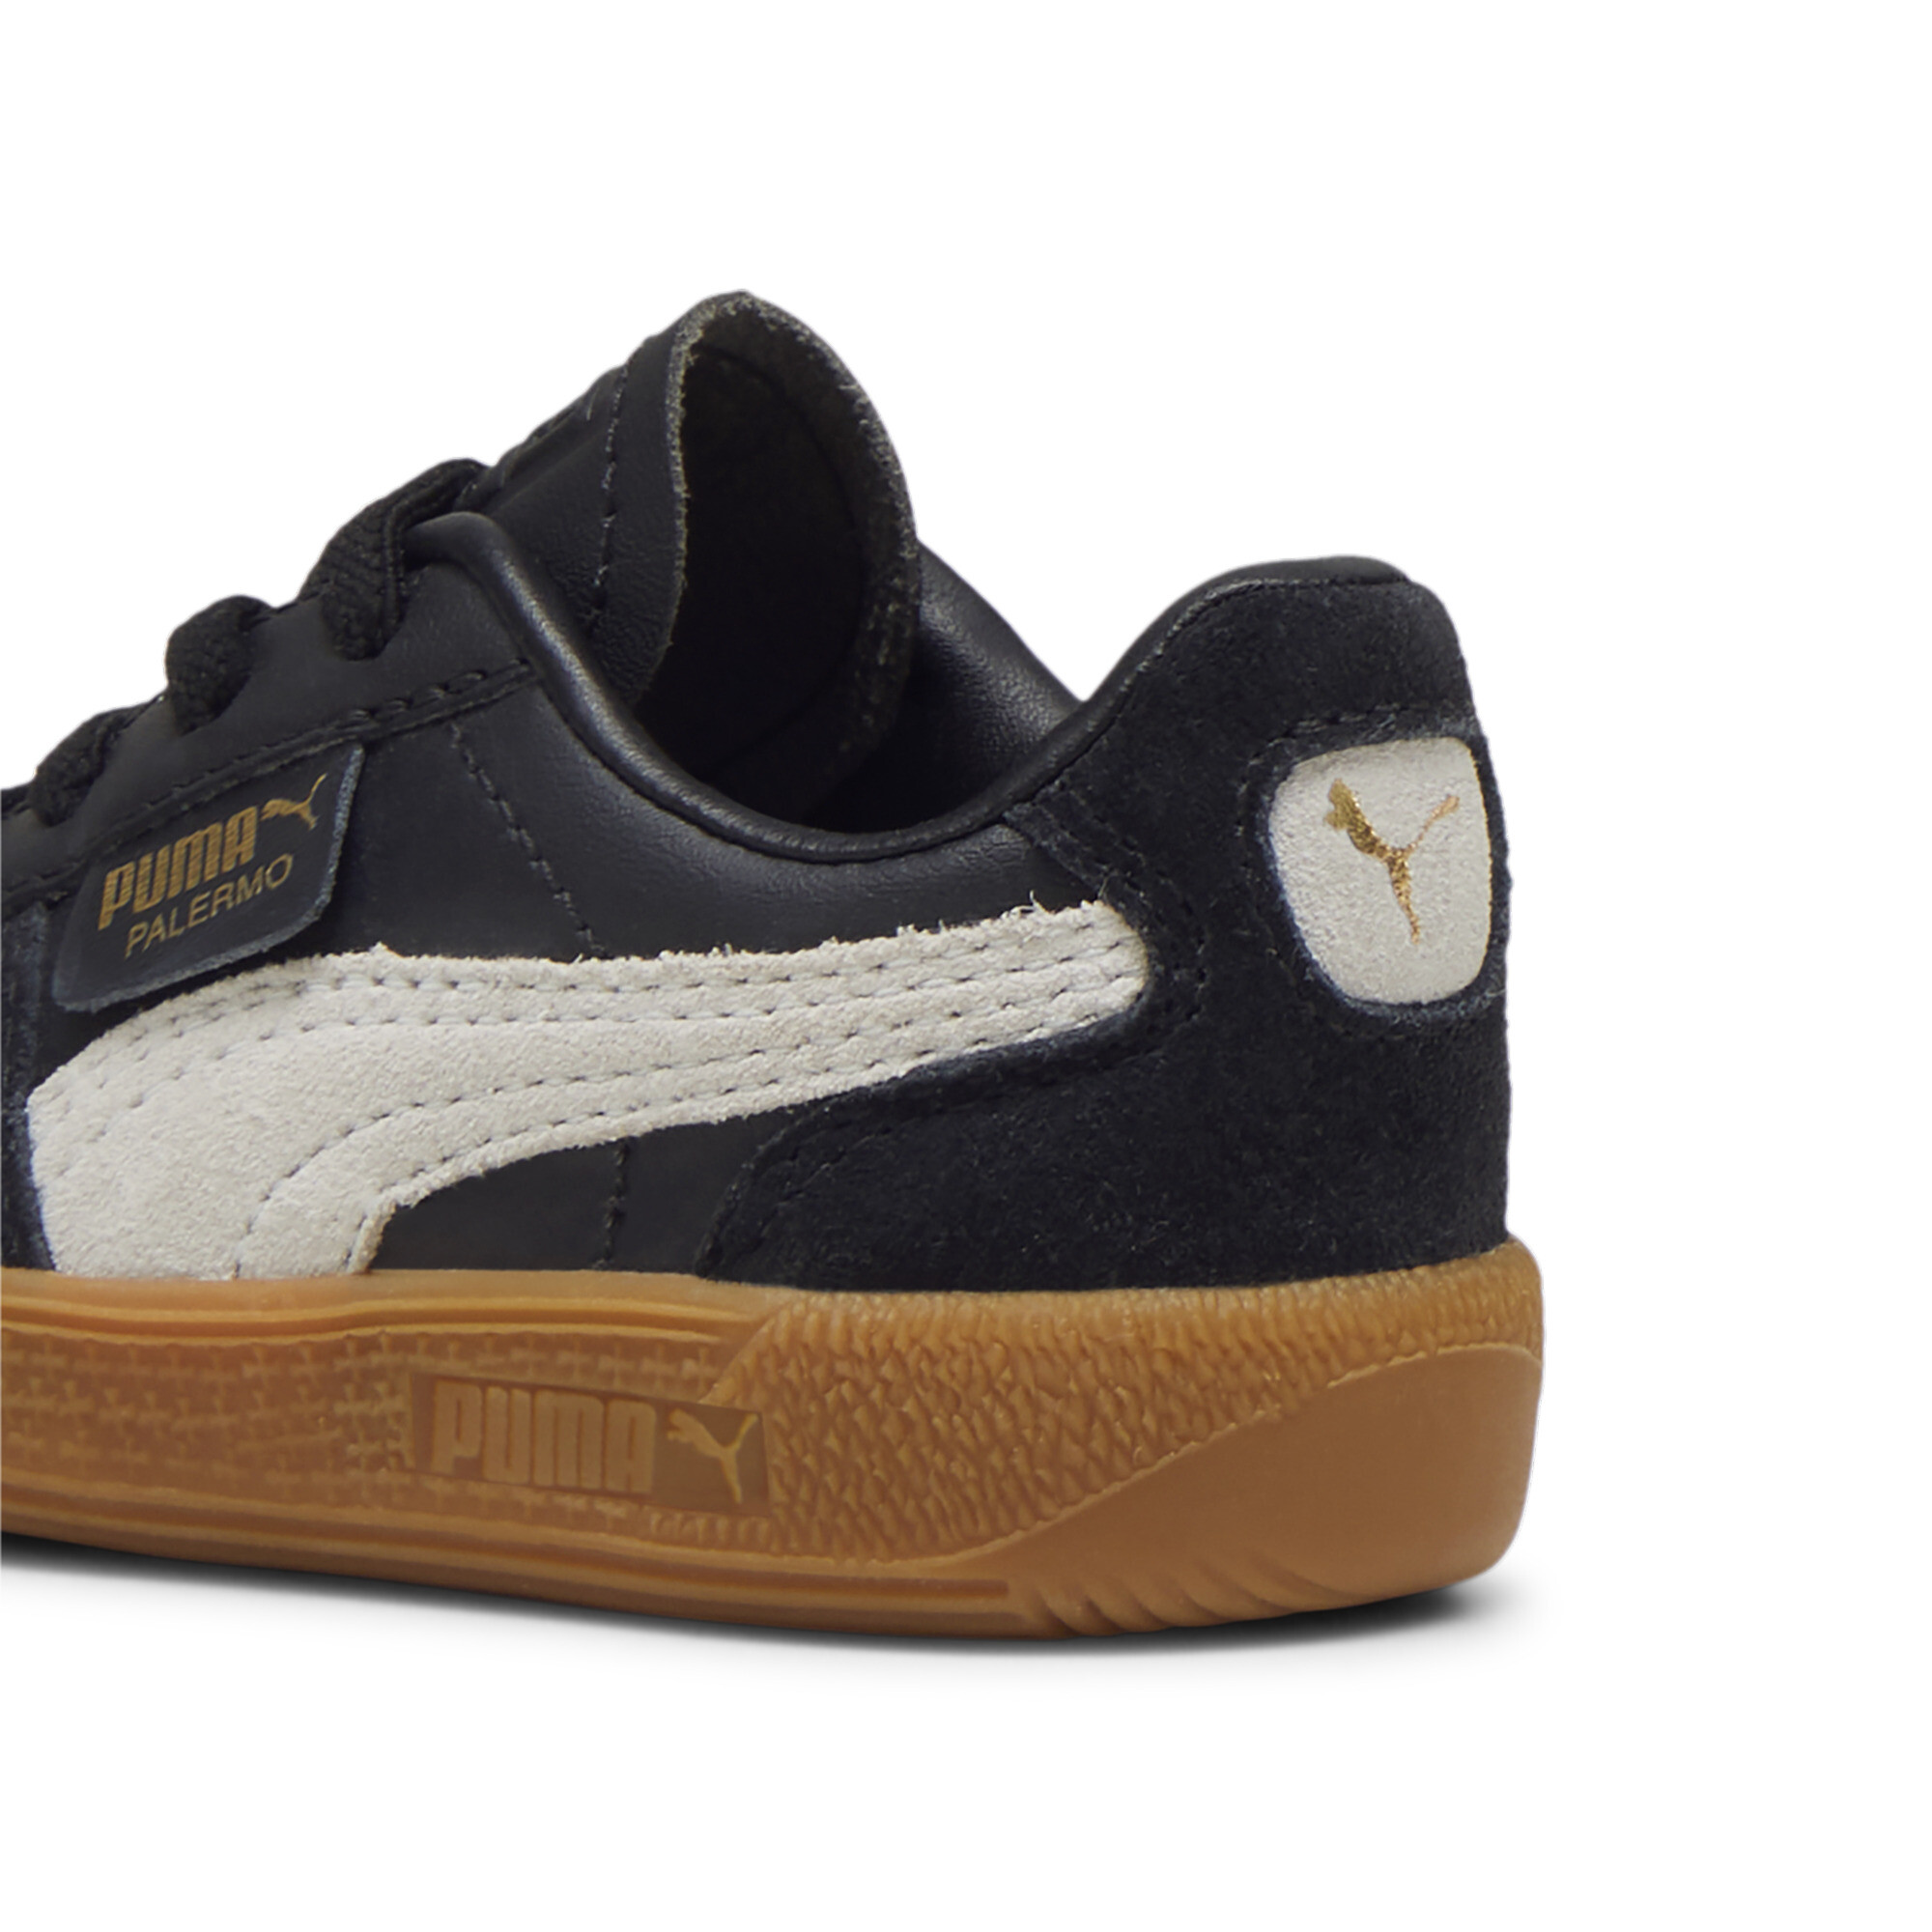 Puma Palermo Lth Toddlers' Sneakers, Black, Size 27, Shoes